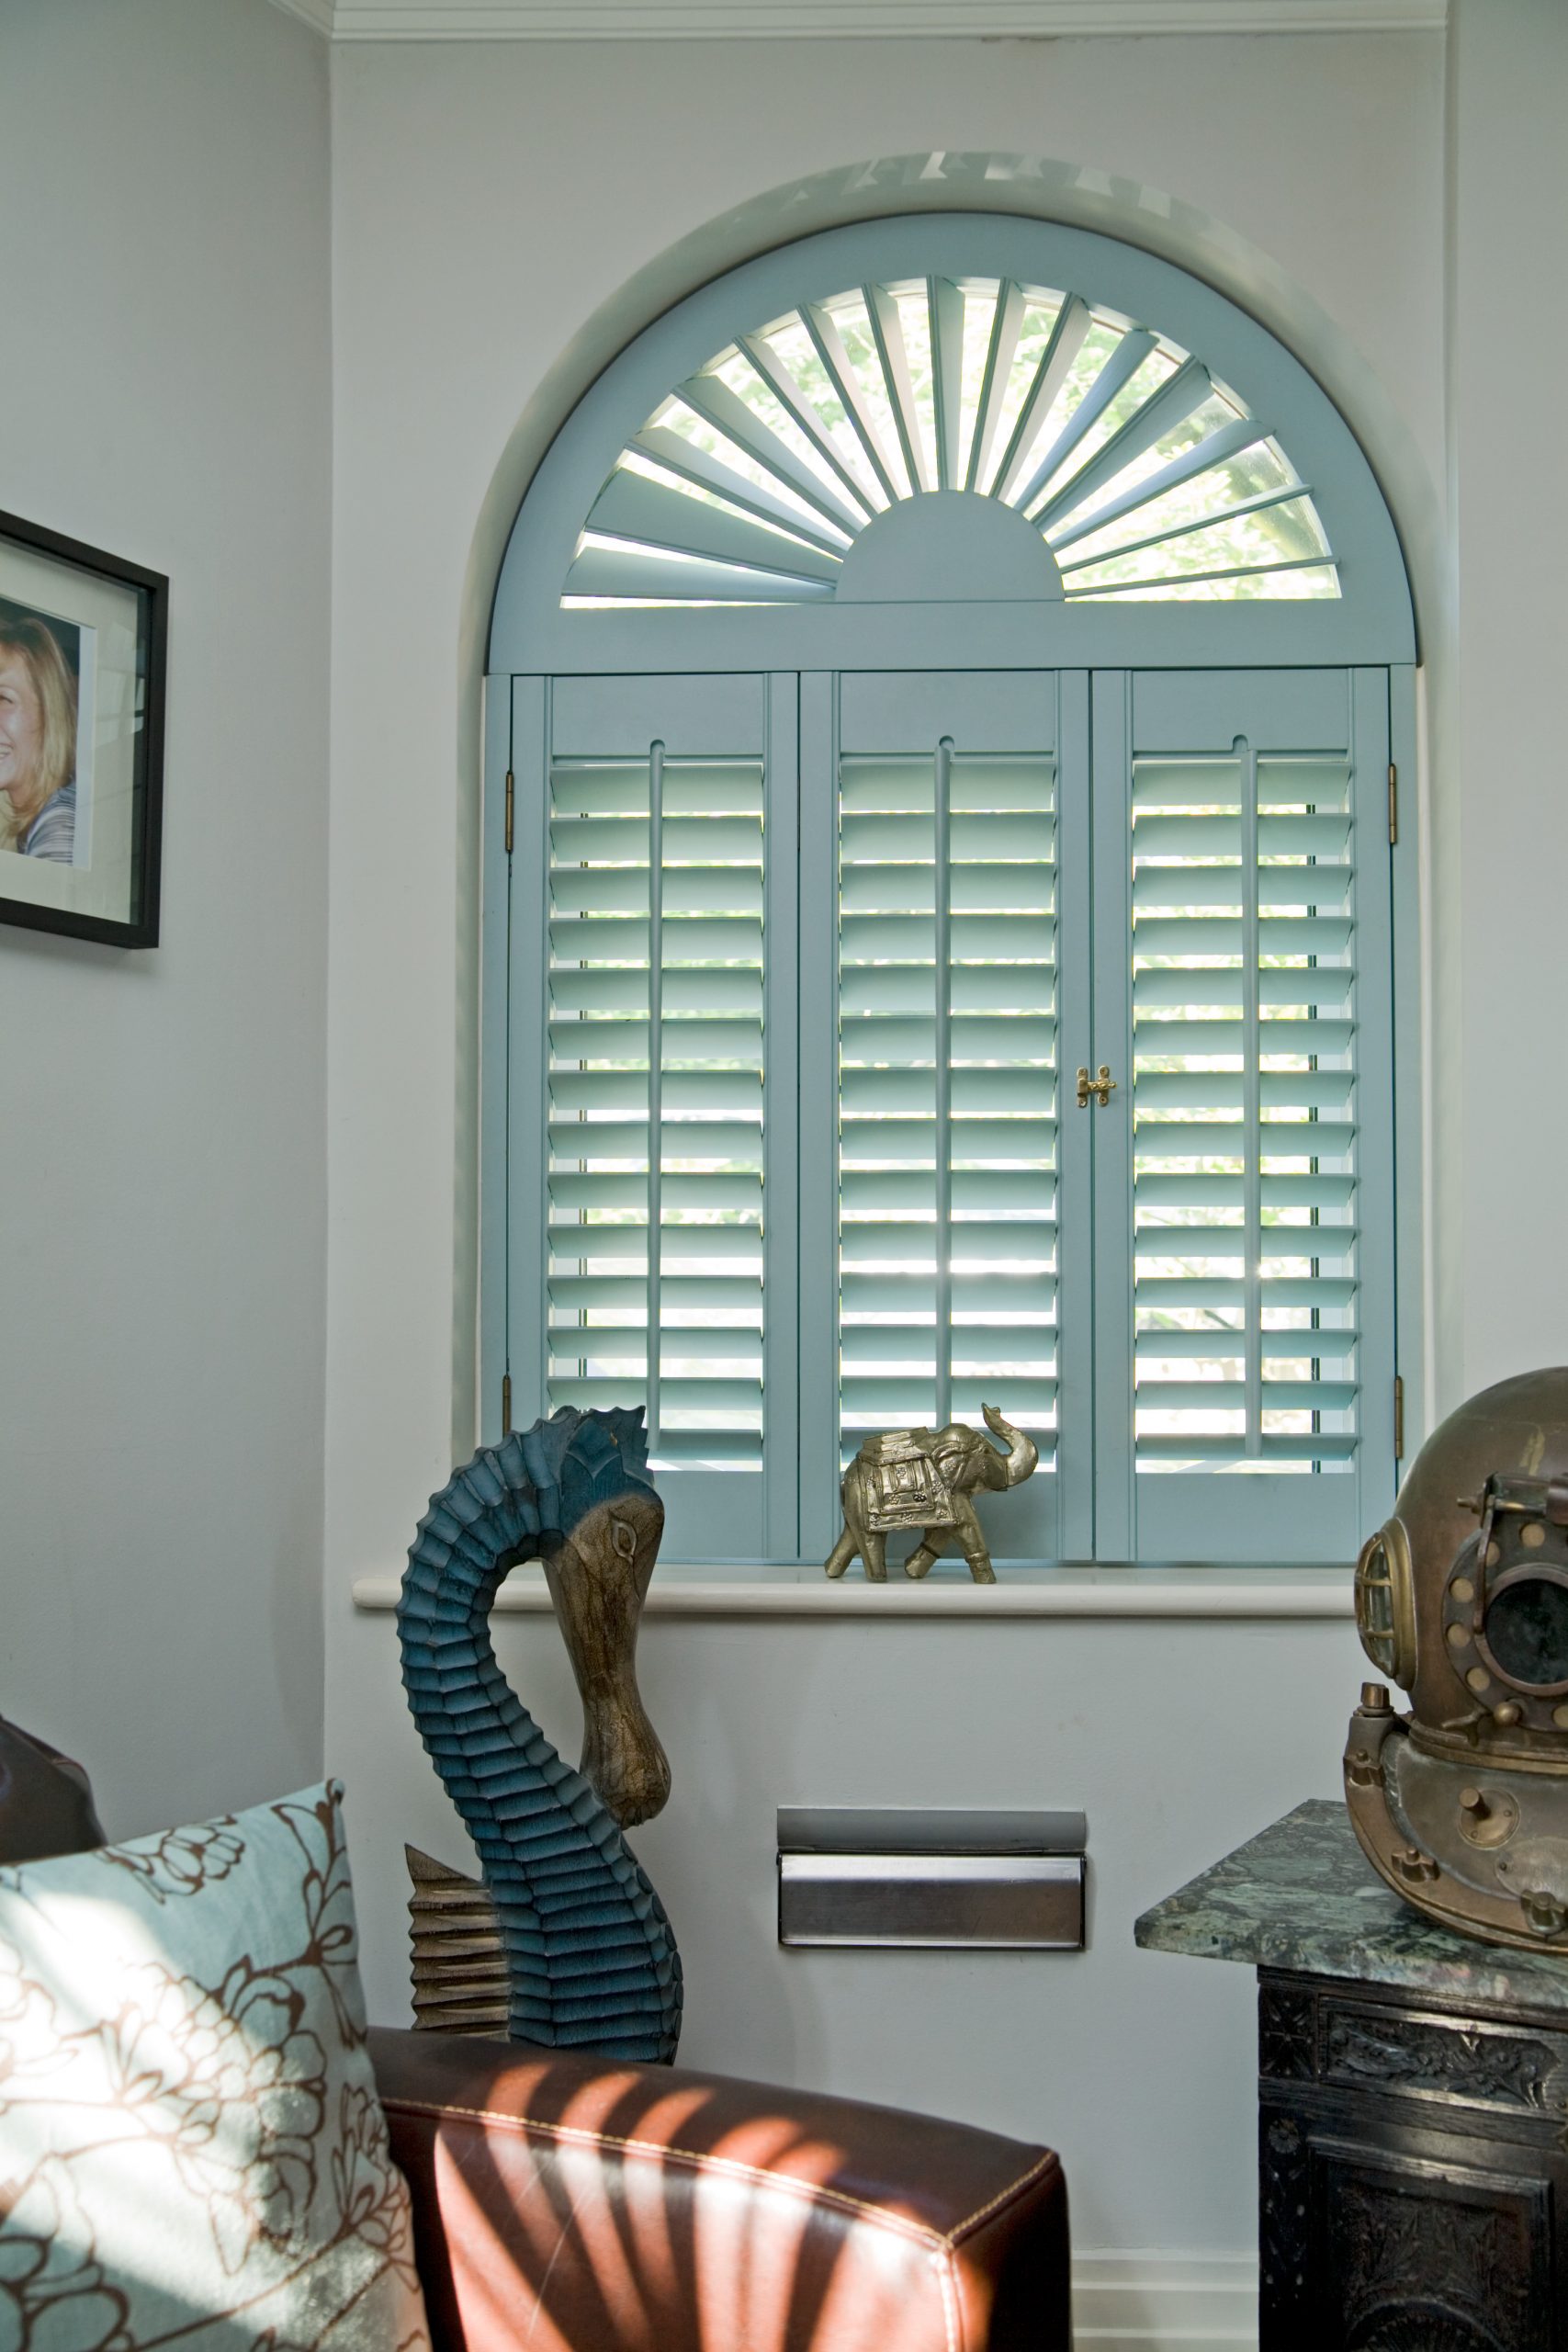 See how to use blinds, shutters and screens in your home